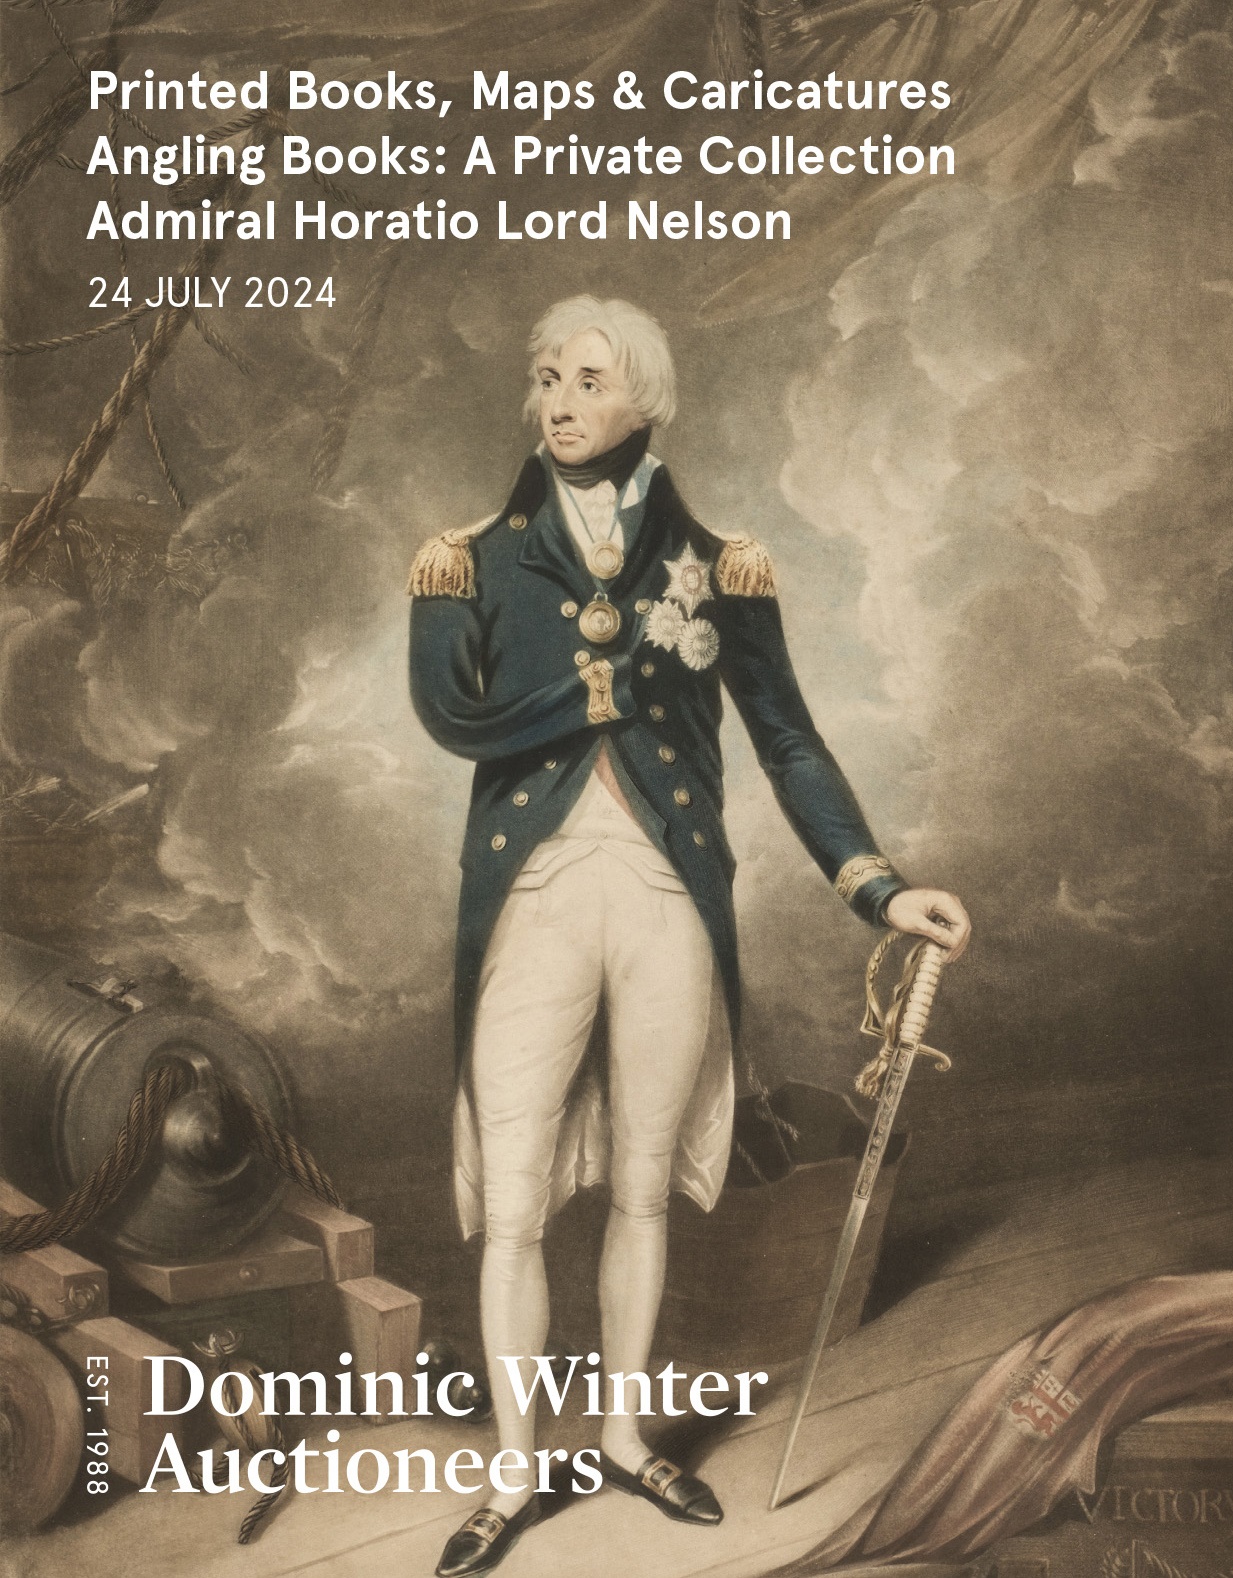 Printed Books, Maps & Caricatures, Angling Books: A Private Collection, Admiral Horatio Lord Nelson